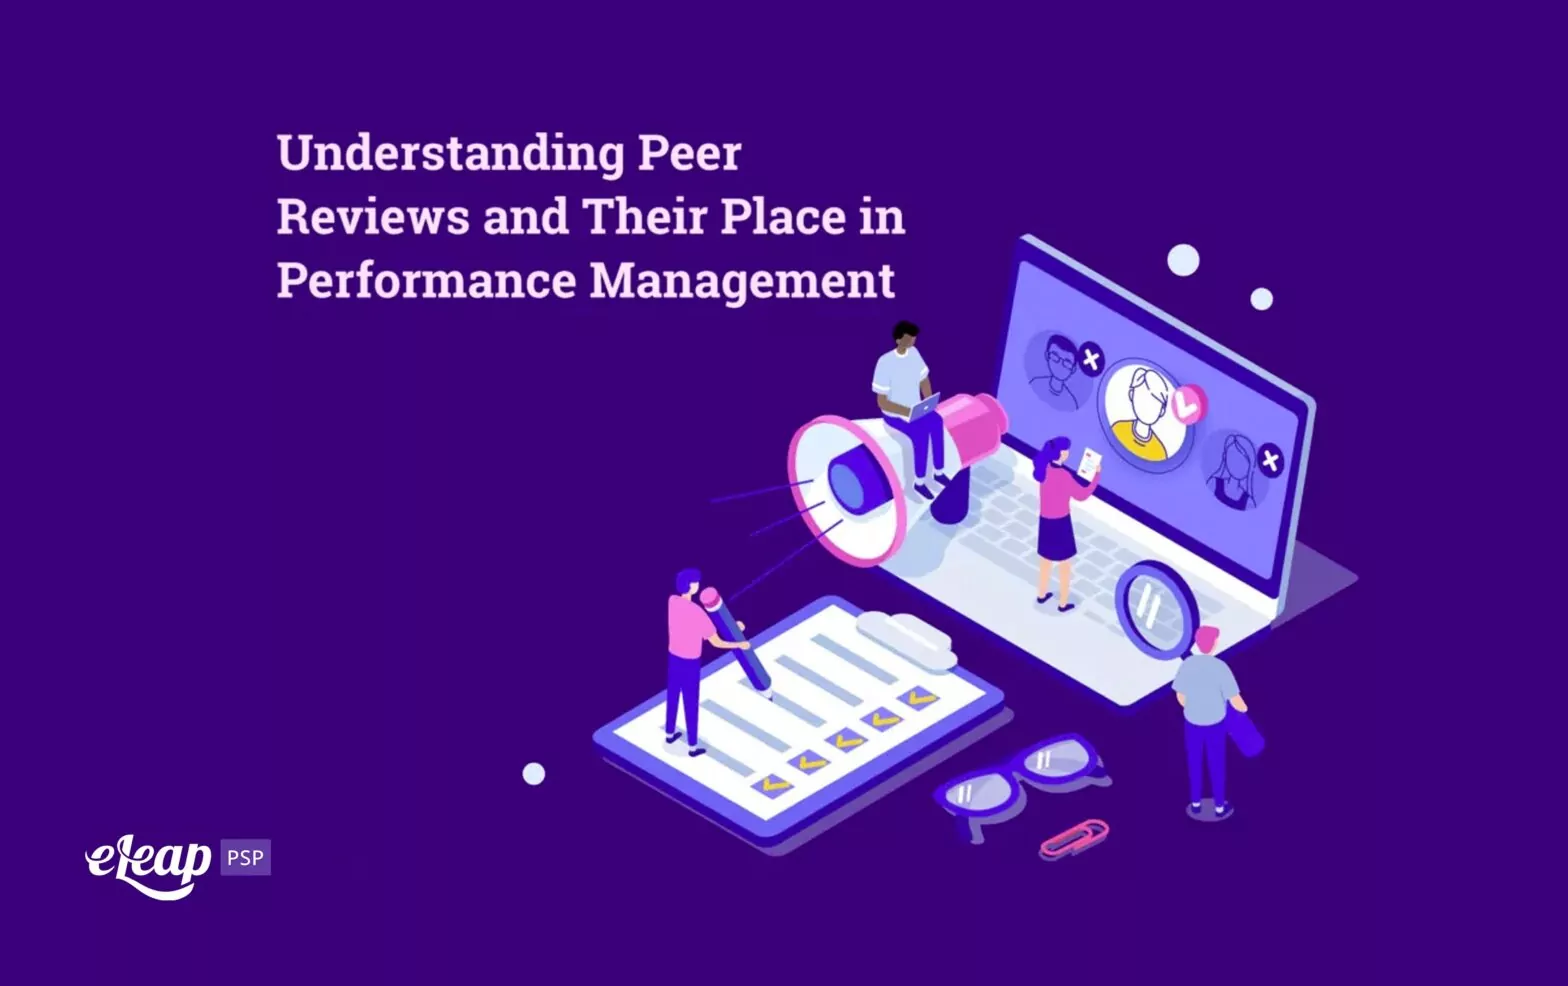 Understanding Peer Reviews and Their Place in Performance Management